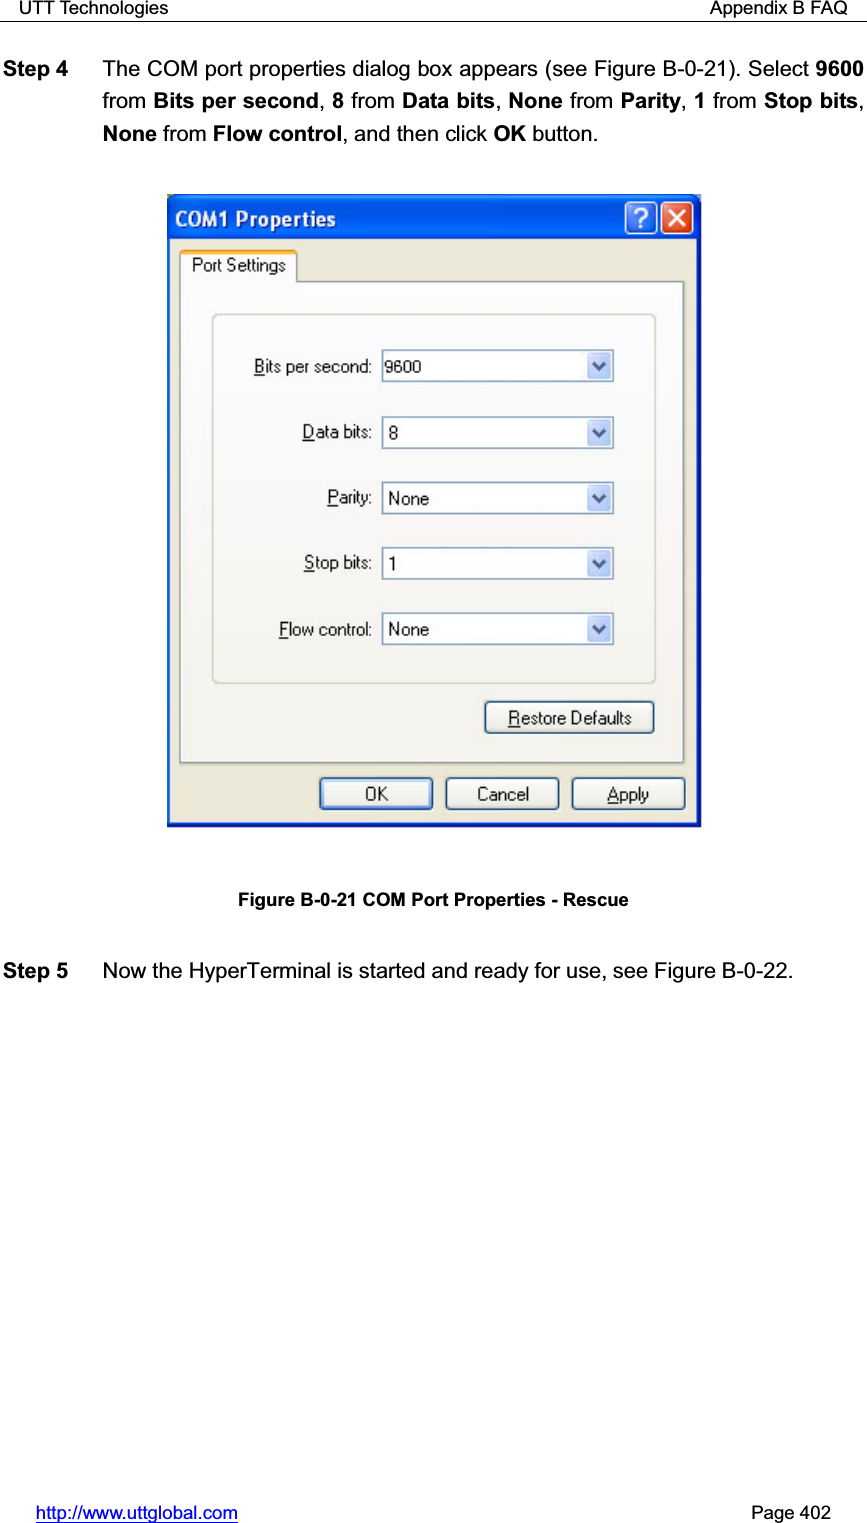 UTT Technologies                                                          Appendix B FAQ http://www.uttglobal.com                                                       Page 402 Step 4  The COM port properties dialog box appears (see Figure B-0-21). Select 9600from Bits per second,8 from Data bits,None from Parity,1 from Stop bits,None from Flow control, and then click OK button. Figure B-0-21 COM Port Properties - Rescue Step 5  Now the HyperTerminal is started and ready for use, see Figure B-0-22.   